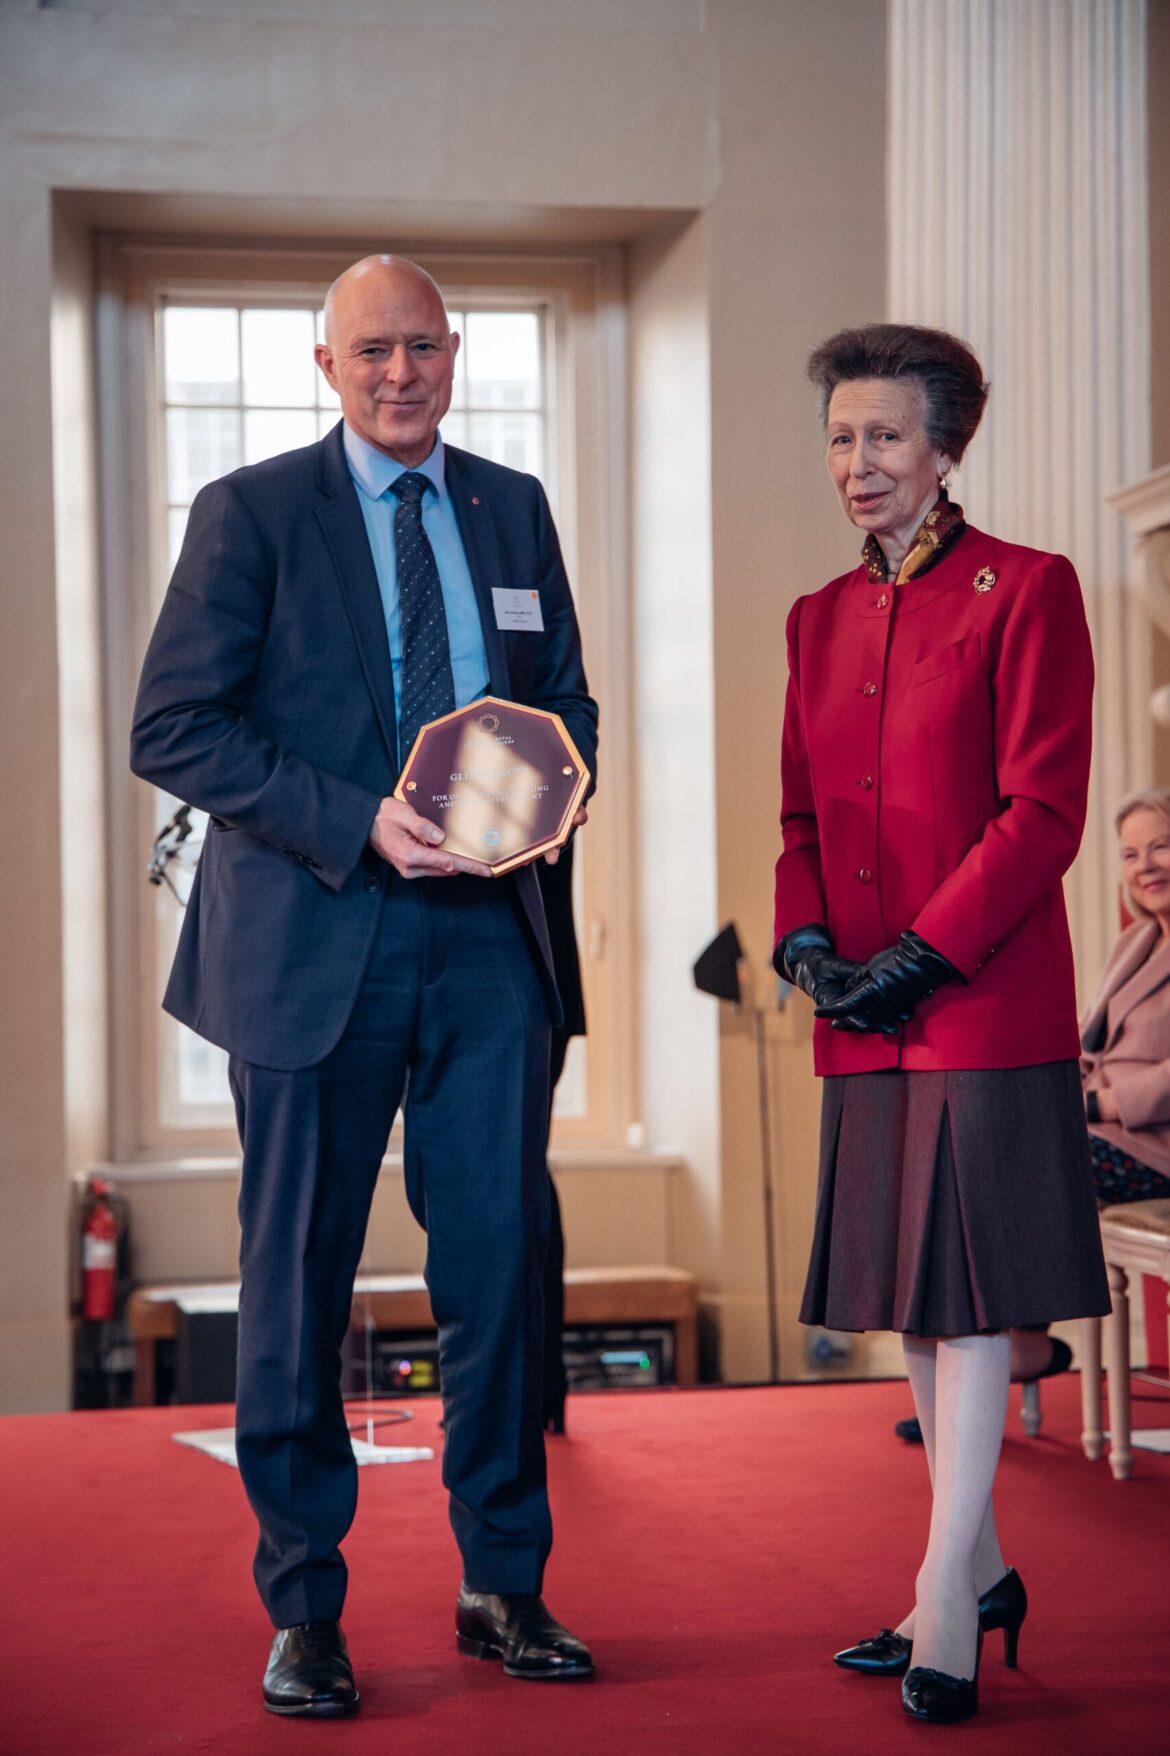 CEO Steve Gelder MBE FCGI pictured collecting the Princess Royal Training award.